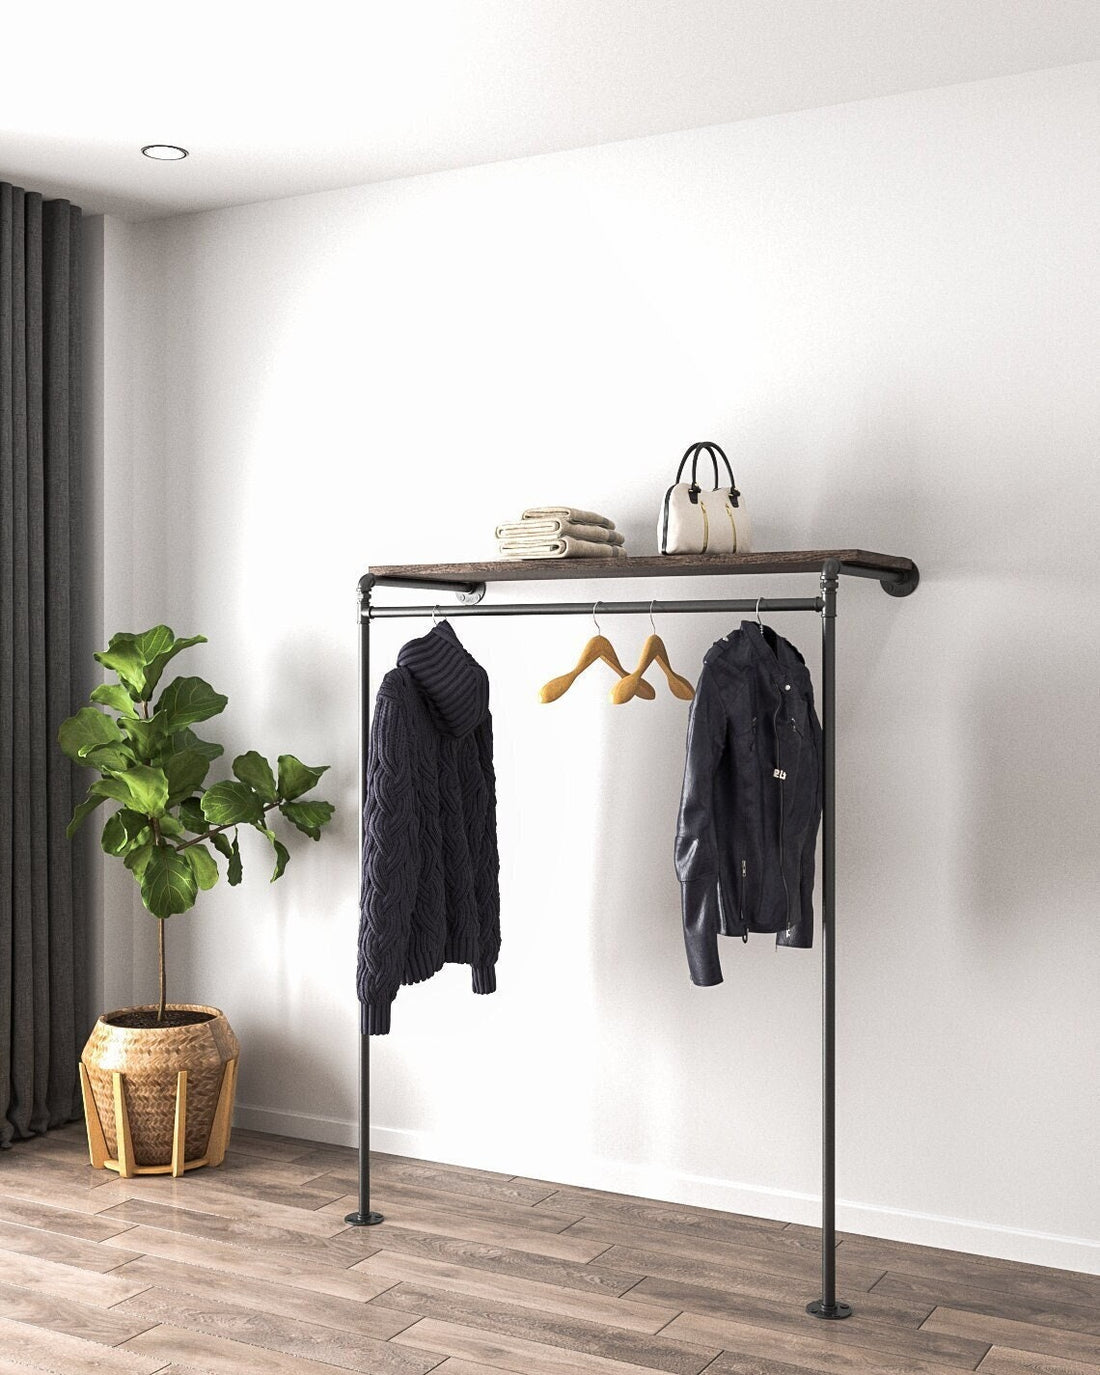 Vintage Clothes Rail, wall-mounted with a pipe clothes rail and wooden shelves, displaying its classic and functional design.